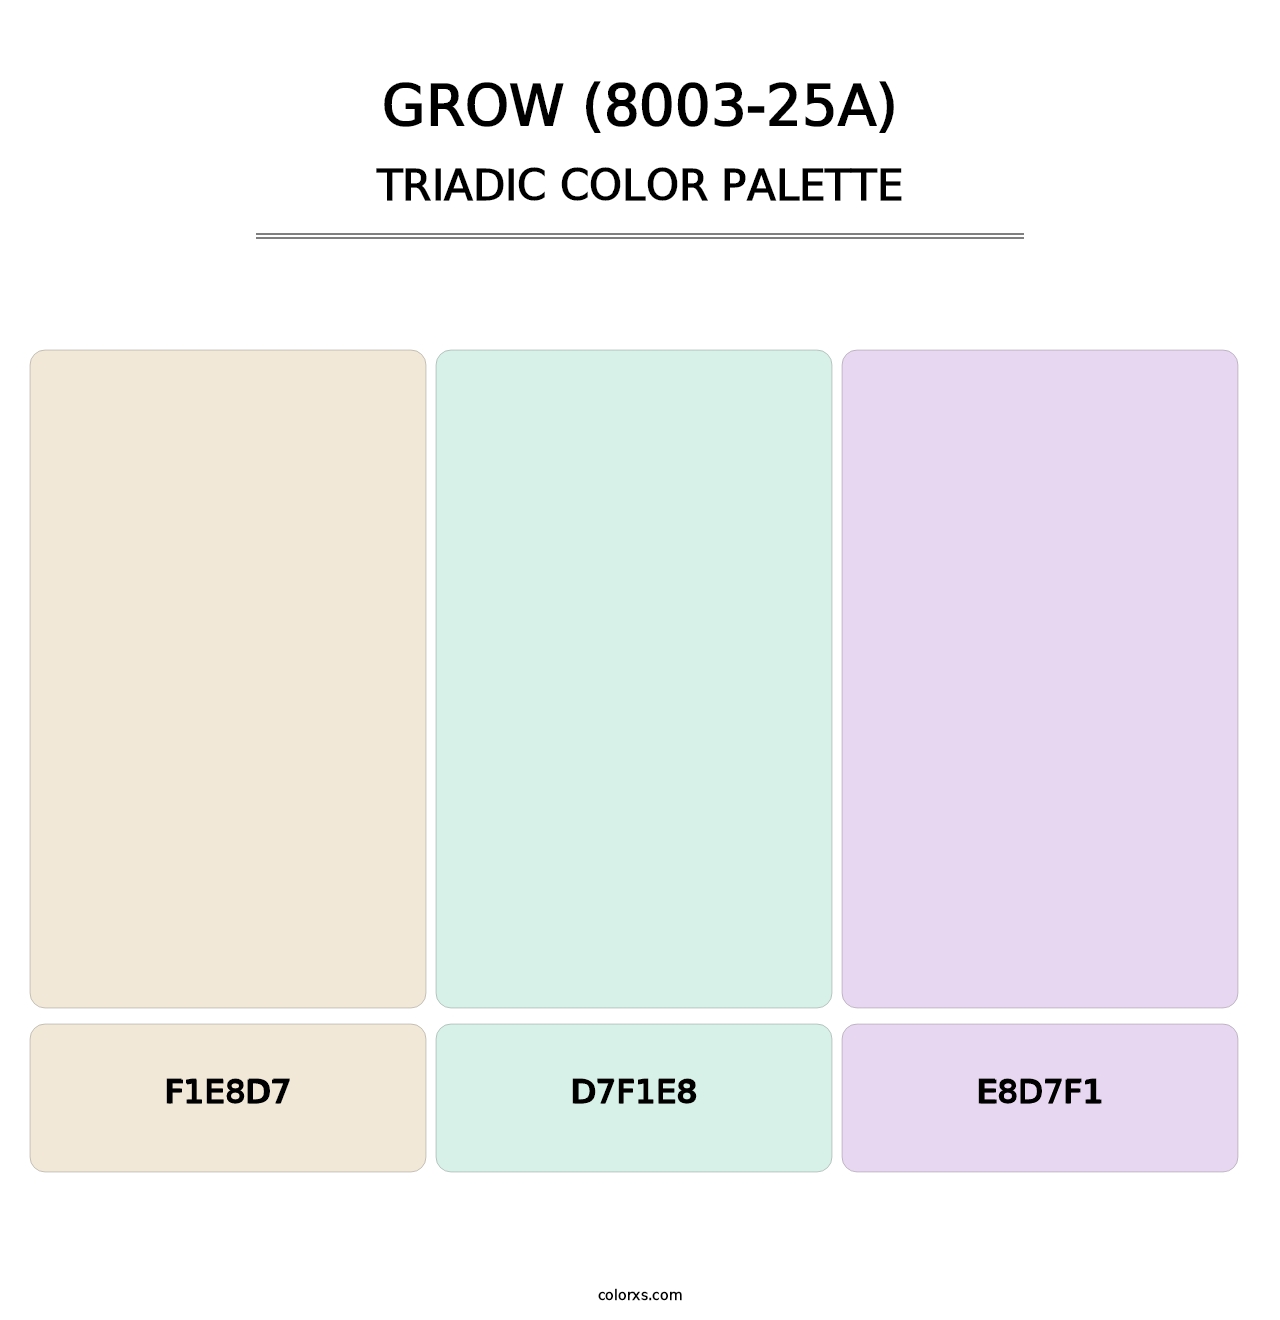 Grow (8003-25A) - Triadic Color Palette